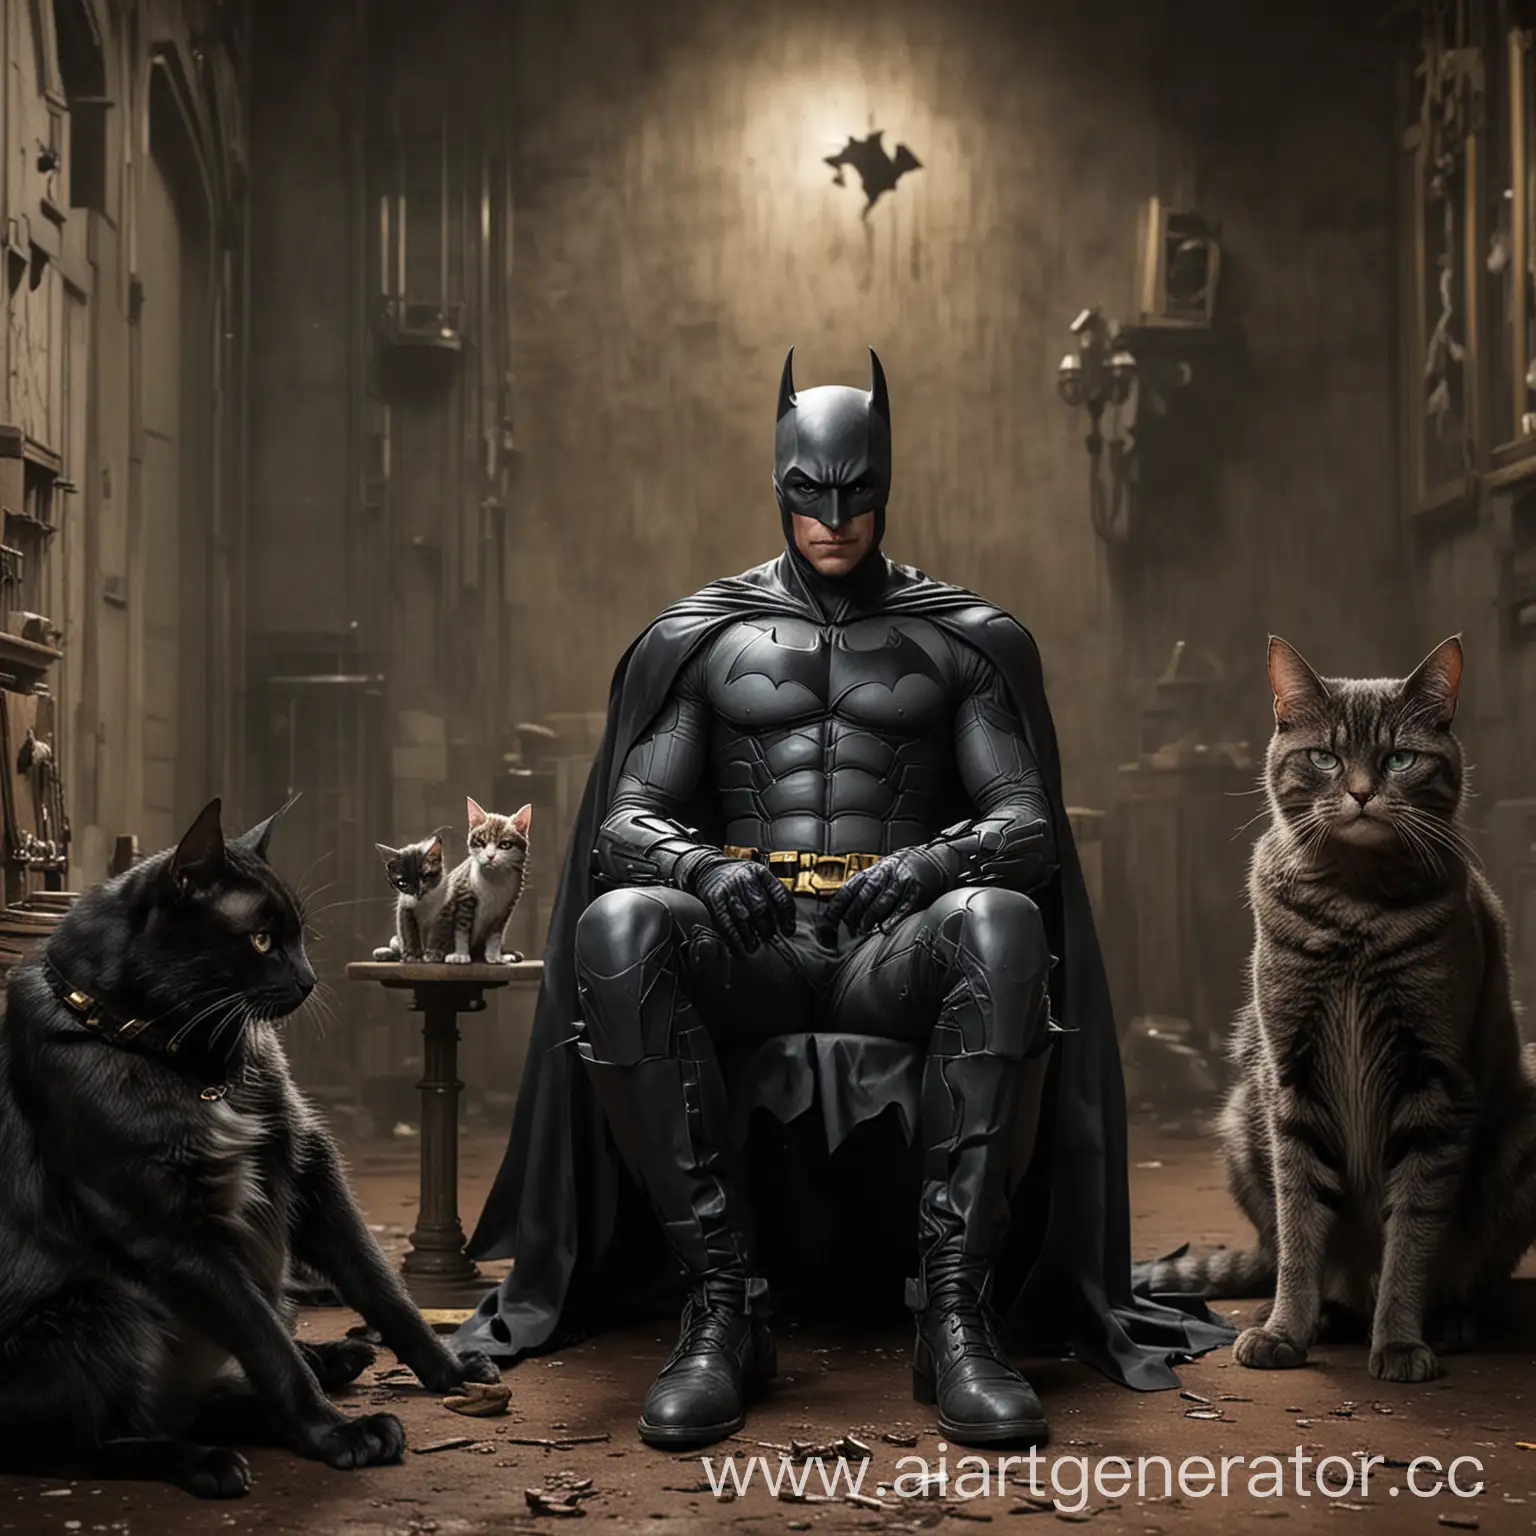 Batman-Chatting-with-Cats-and-Joker-in-Gotham